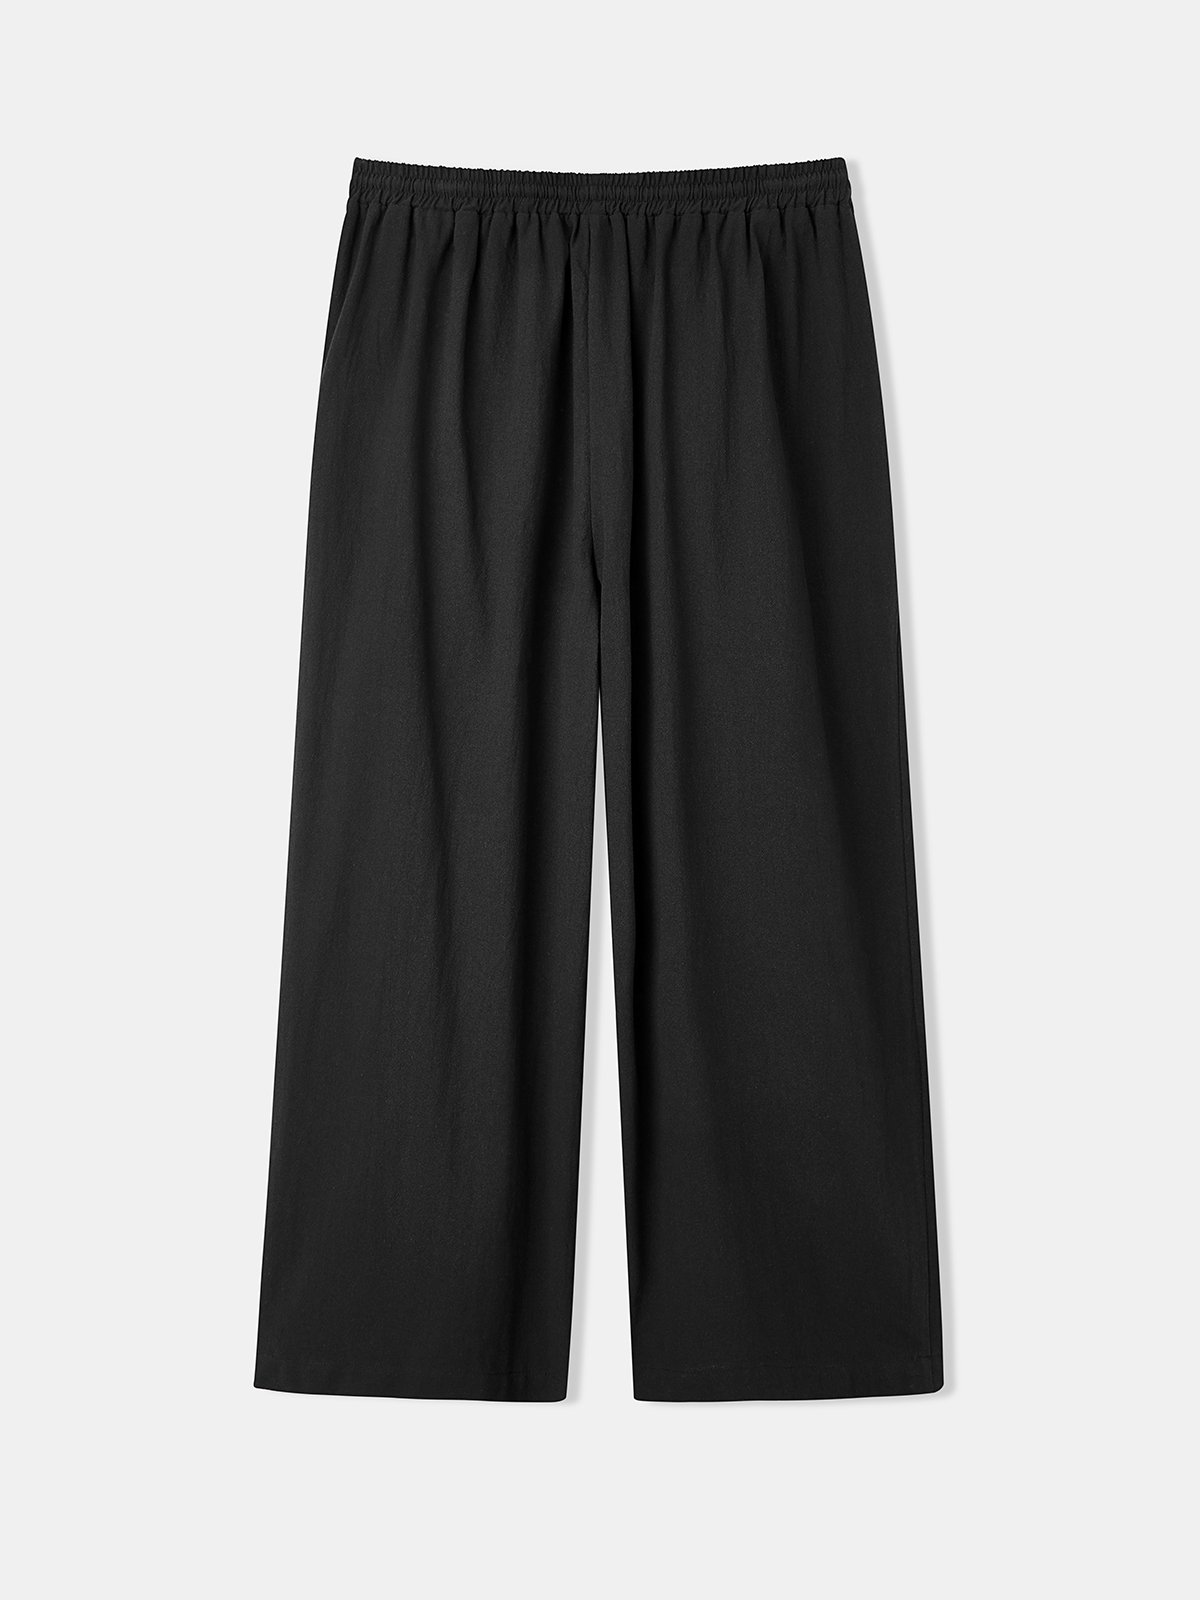 Hardaddy Cotton Plain Casual Cropped Pants